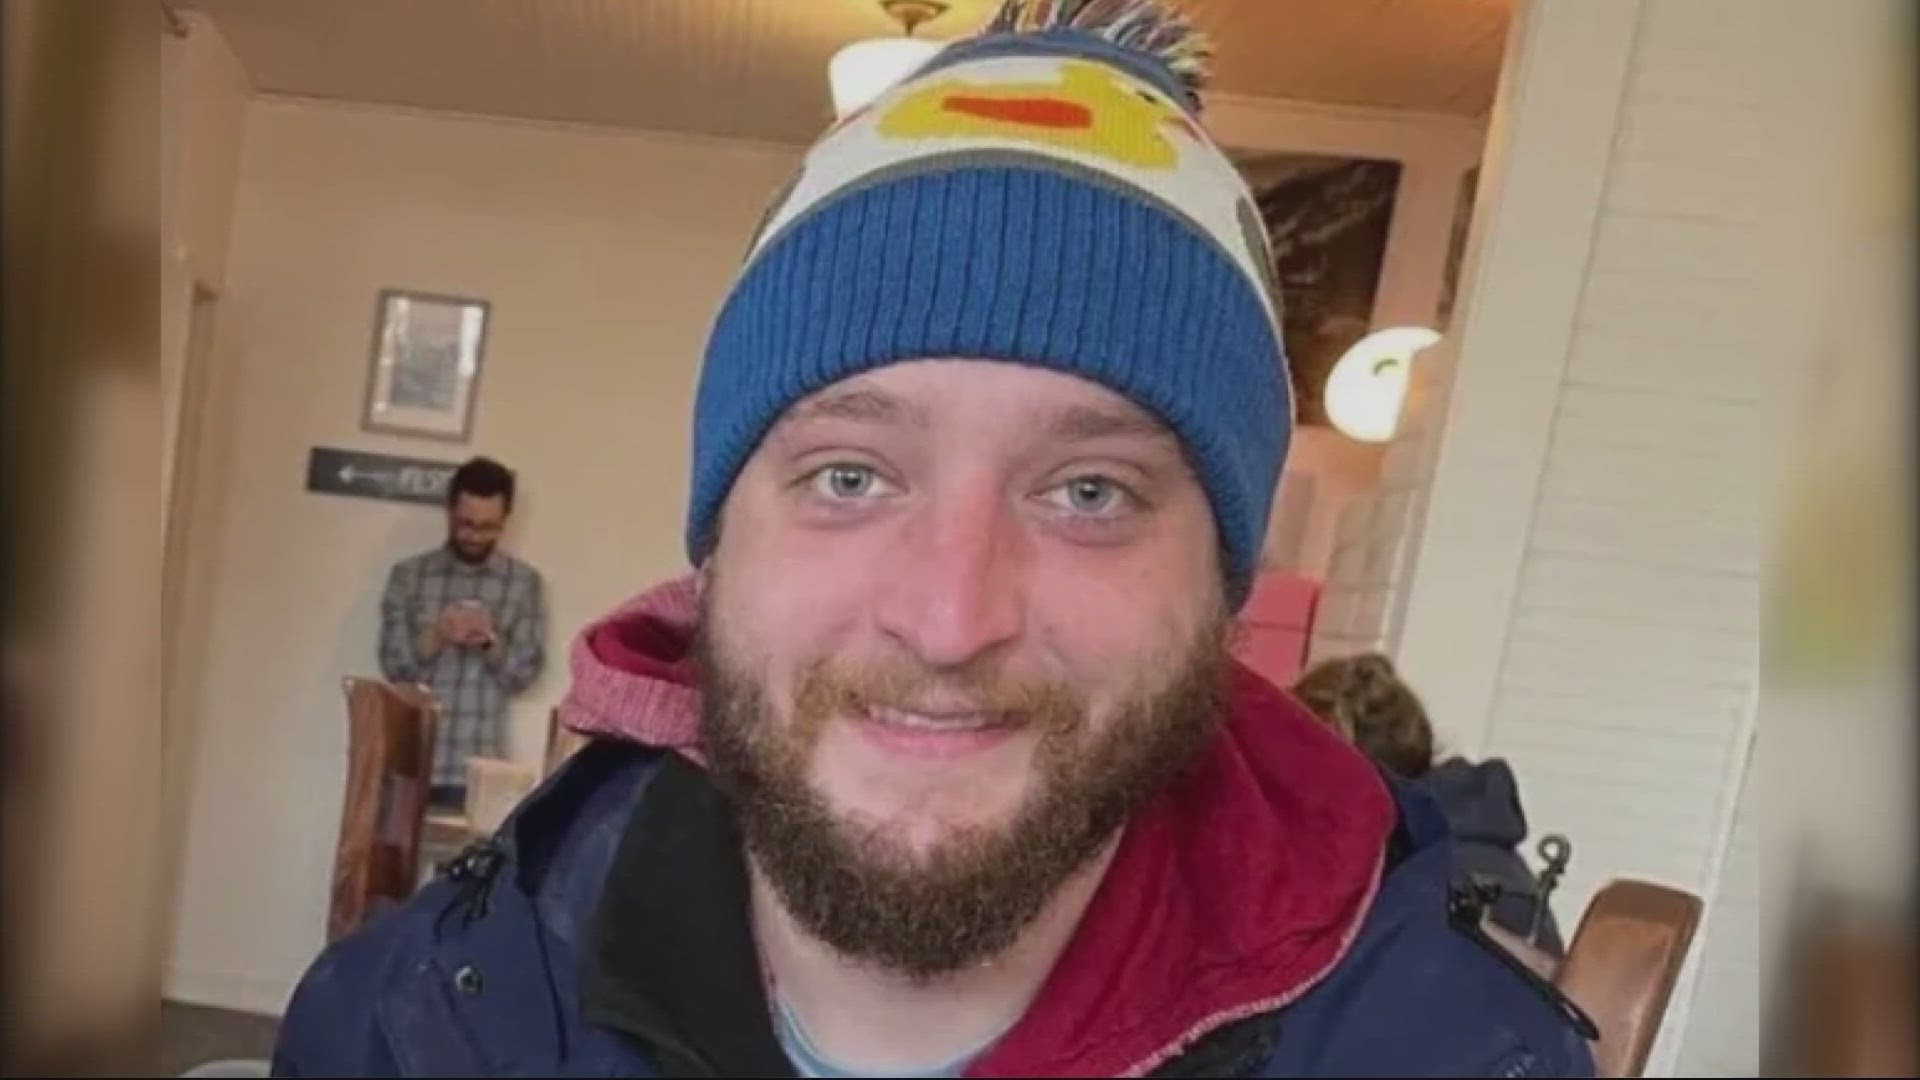 David Olson was 28 and lived in Southeast Portland. His family says he was kind hearted and always a moment away from a joke and a smile.